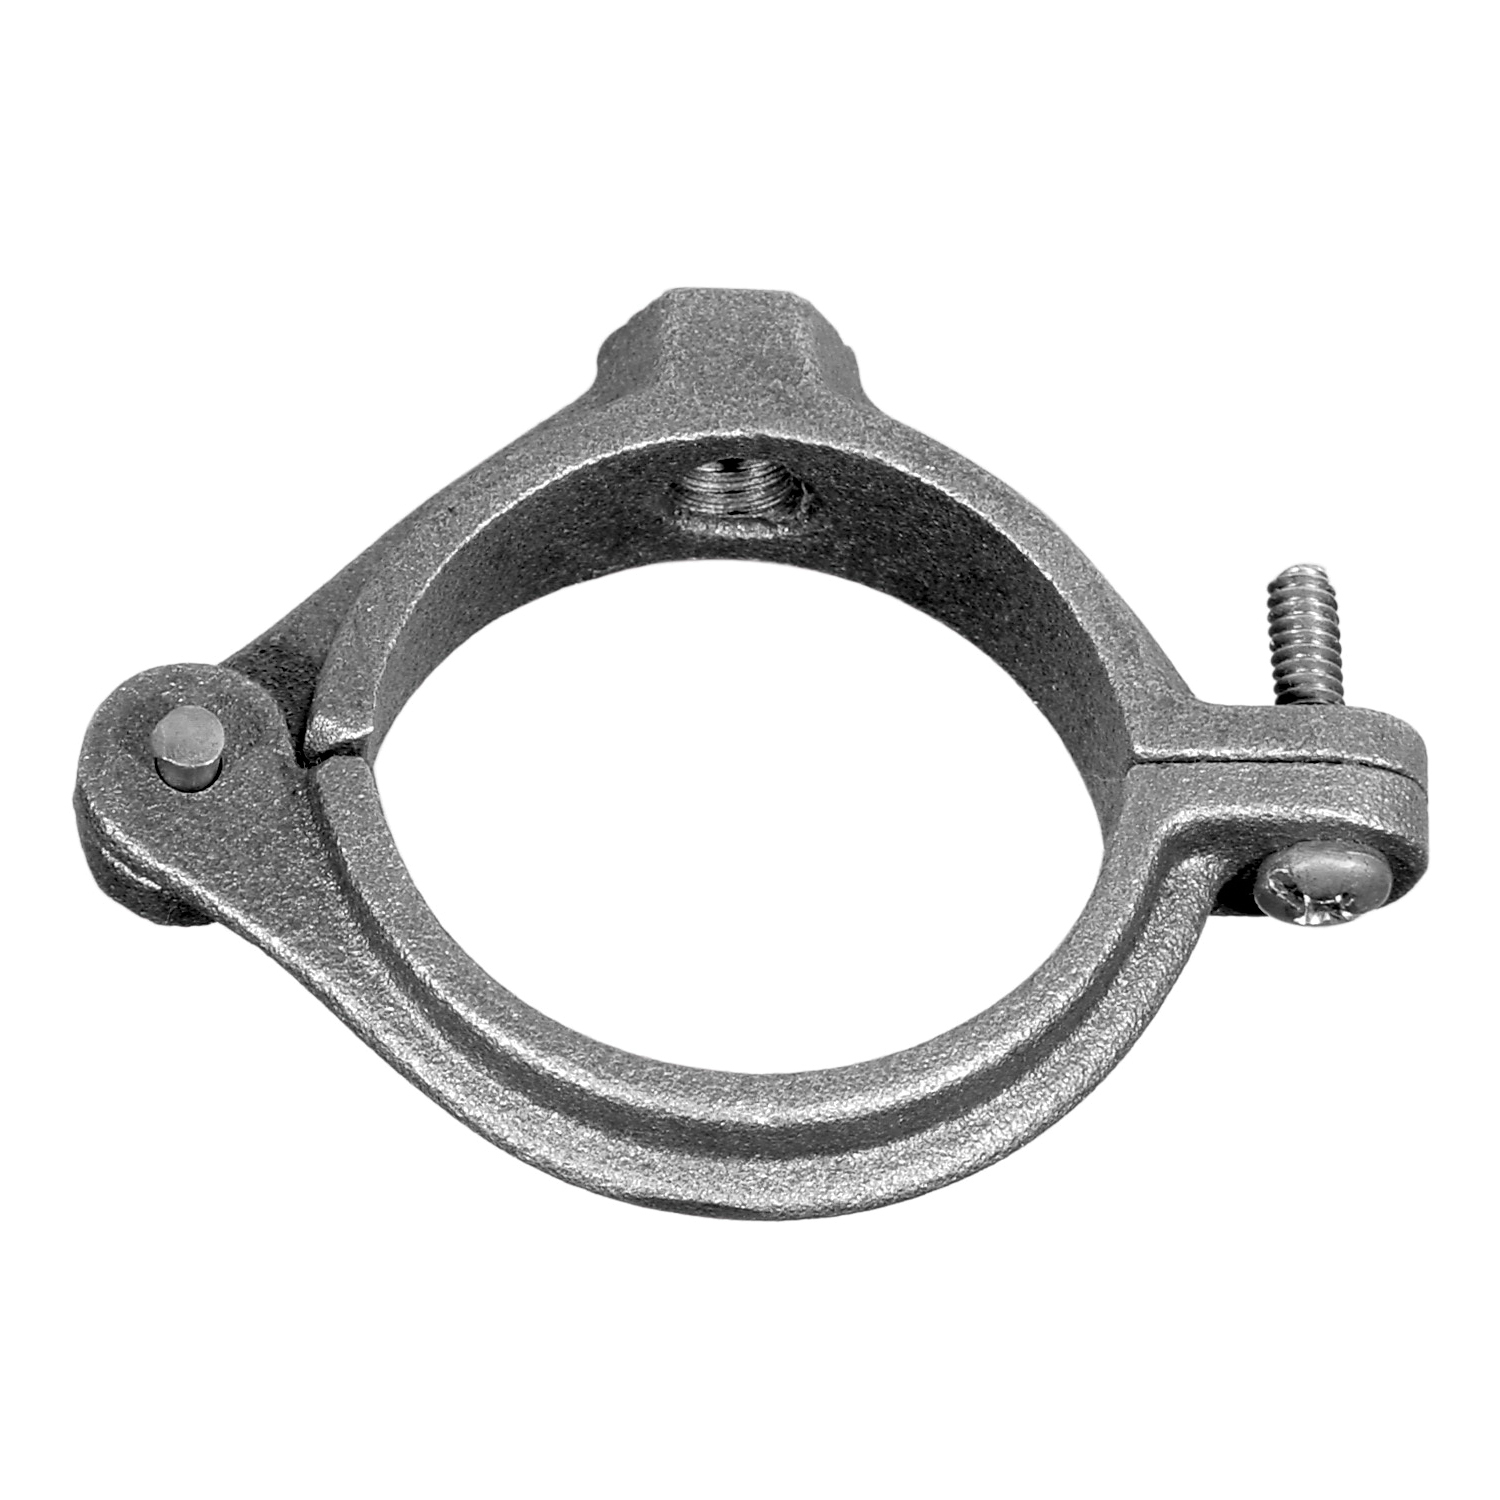 Anvil® 0560018863 FIG 138R Extension Split Pipe Clamp, 2 in Pipe/Tube, 3/8 in Rod, 180 lb Load, Malleable Iron, Black Oxide, Import